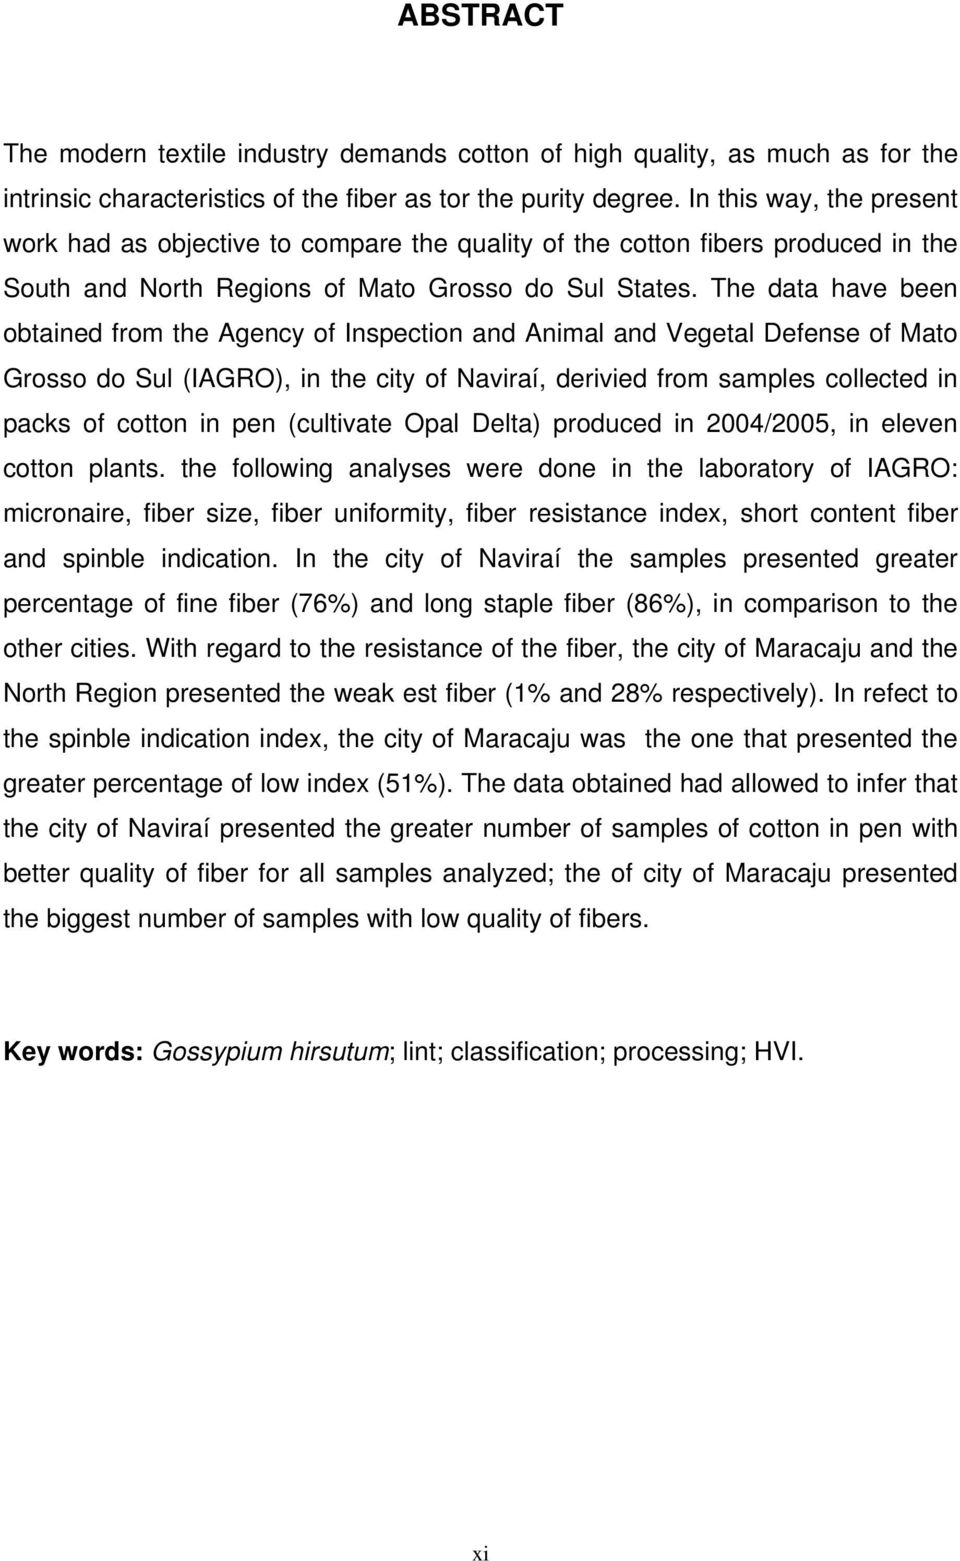 The data have been obtained from the Agency of Inspection and Animal and Vegetal Defense of Mato Grosso do Sul (IAGRO), in the city of Naviraí, derivied from samples collected in packs of cotton in